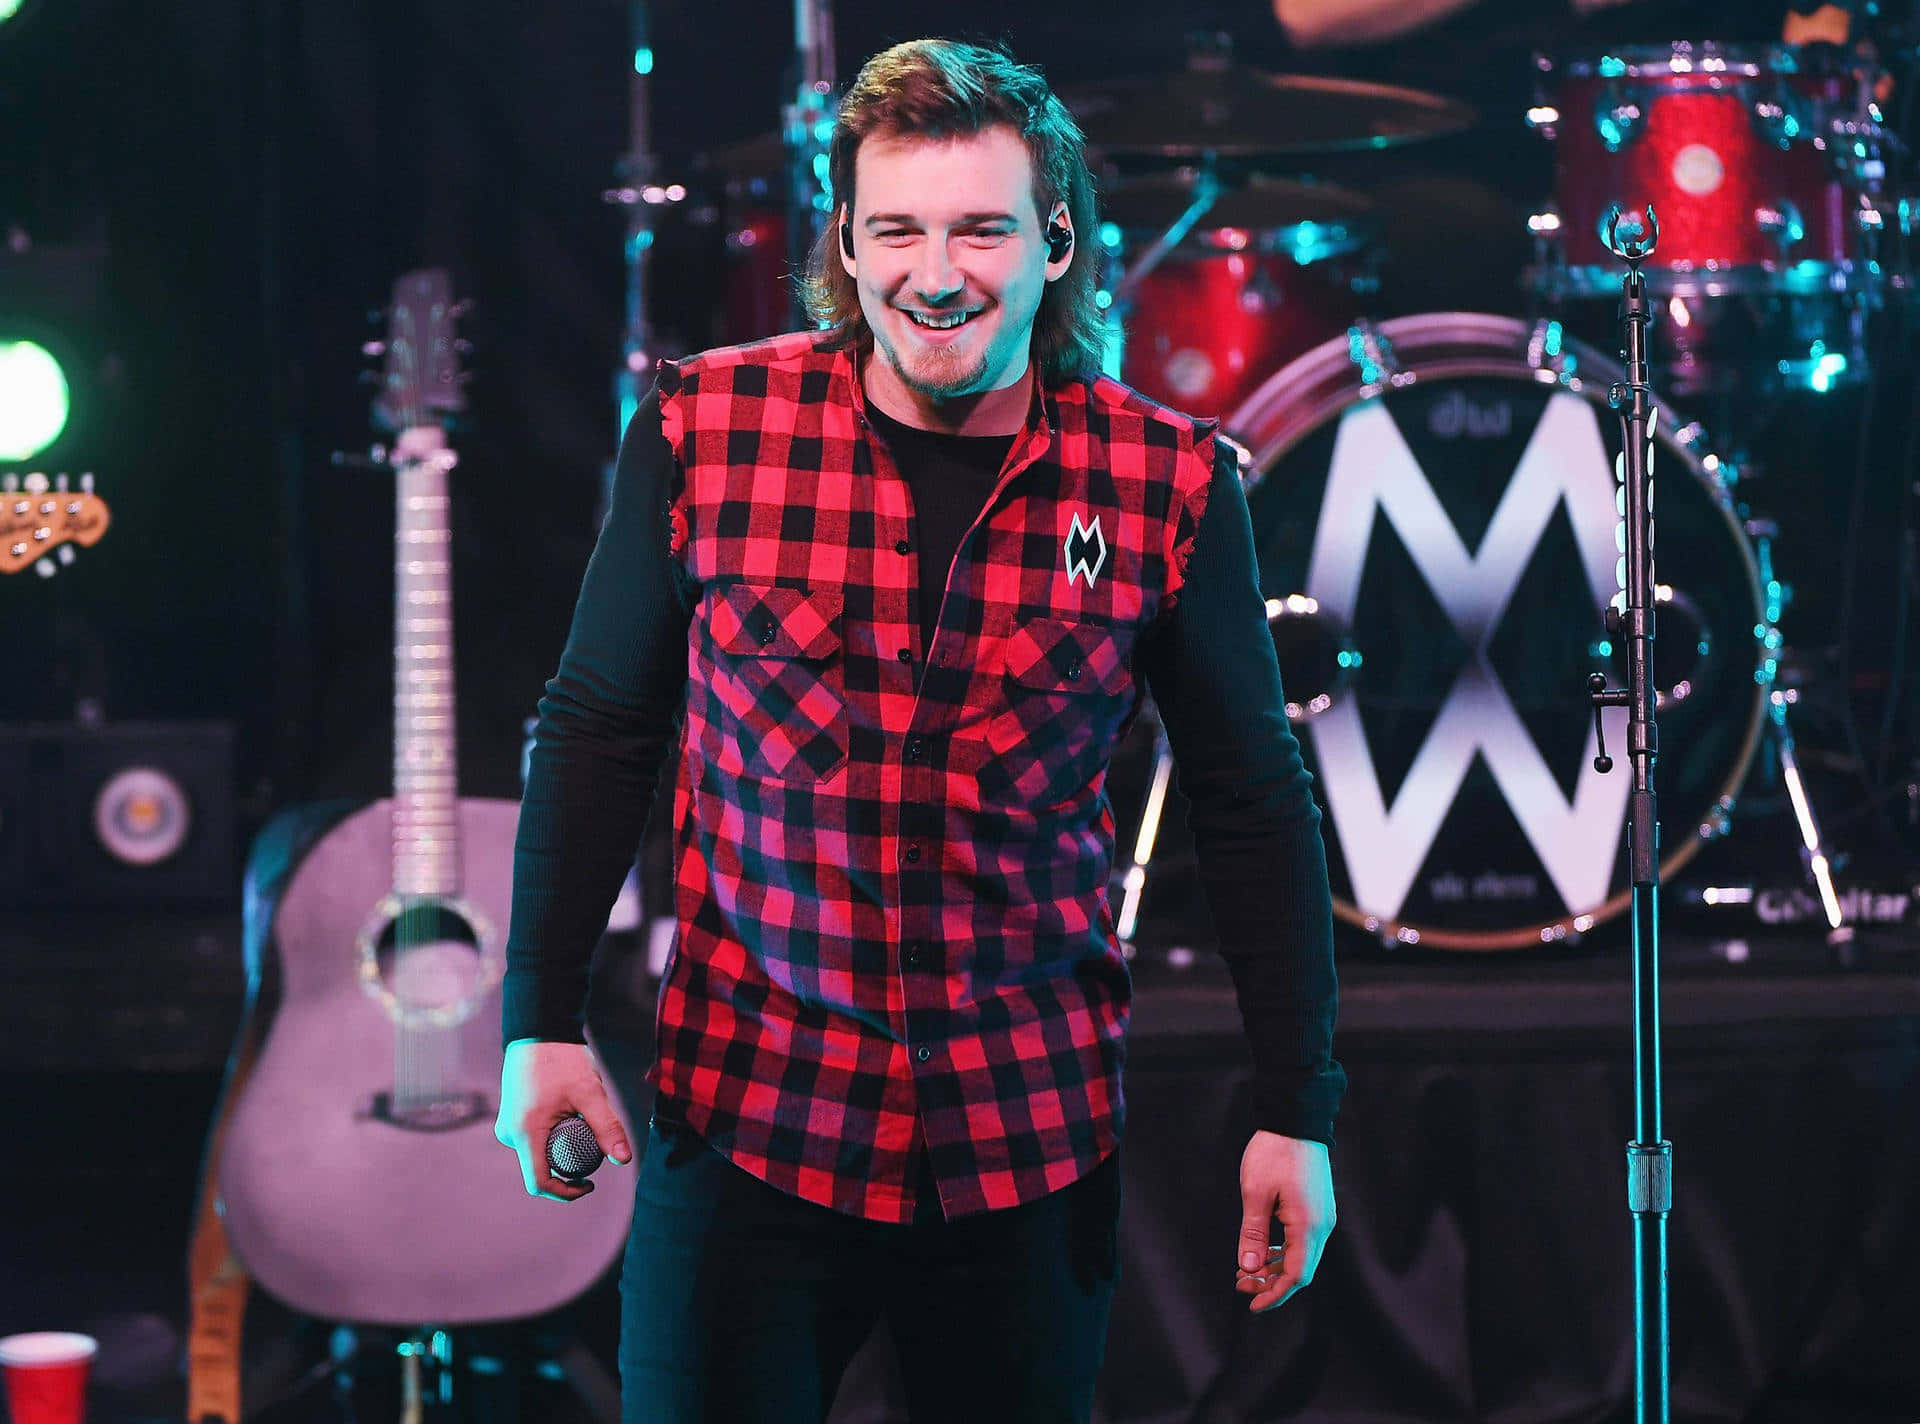 A Man In A Plaid Shirt Is Smiling On Stage